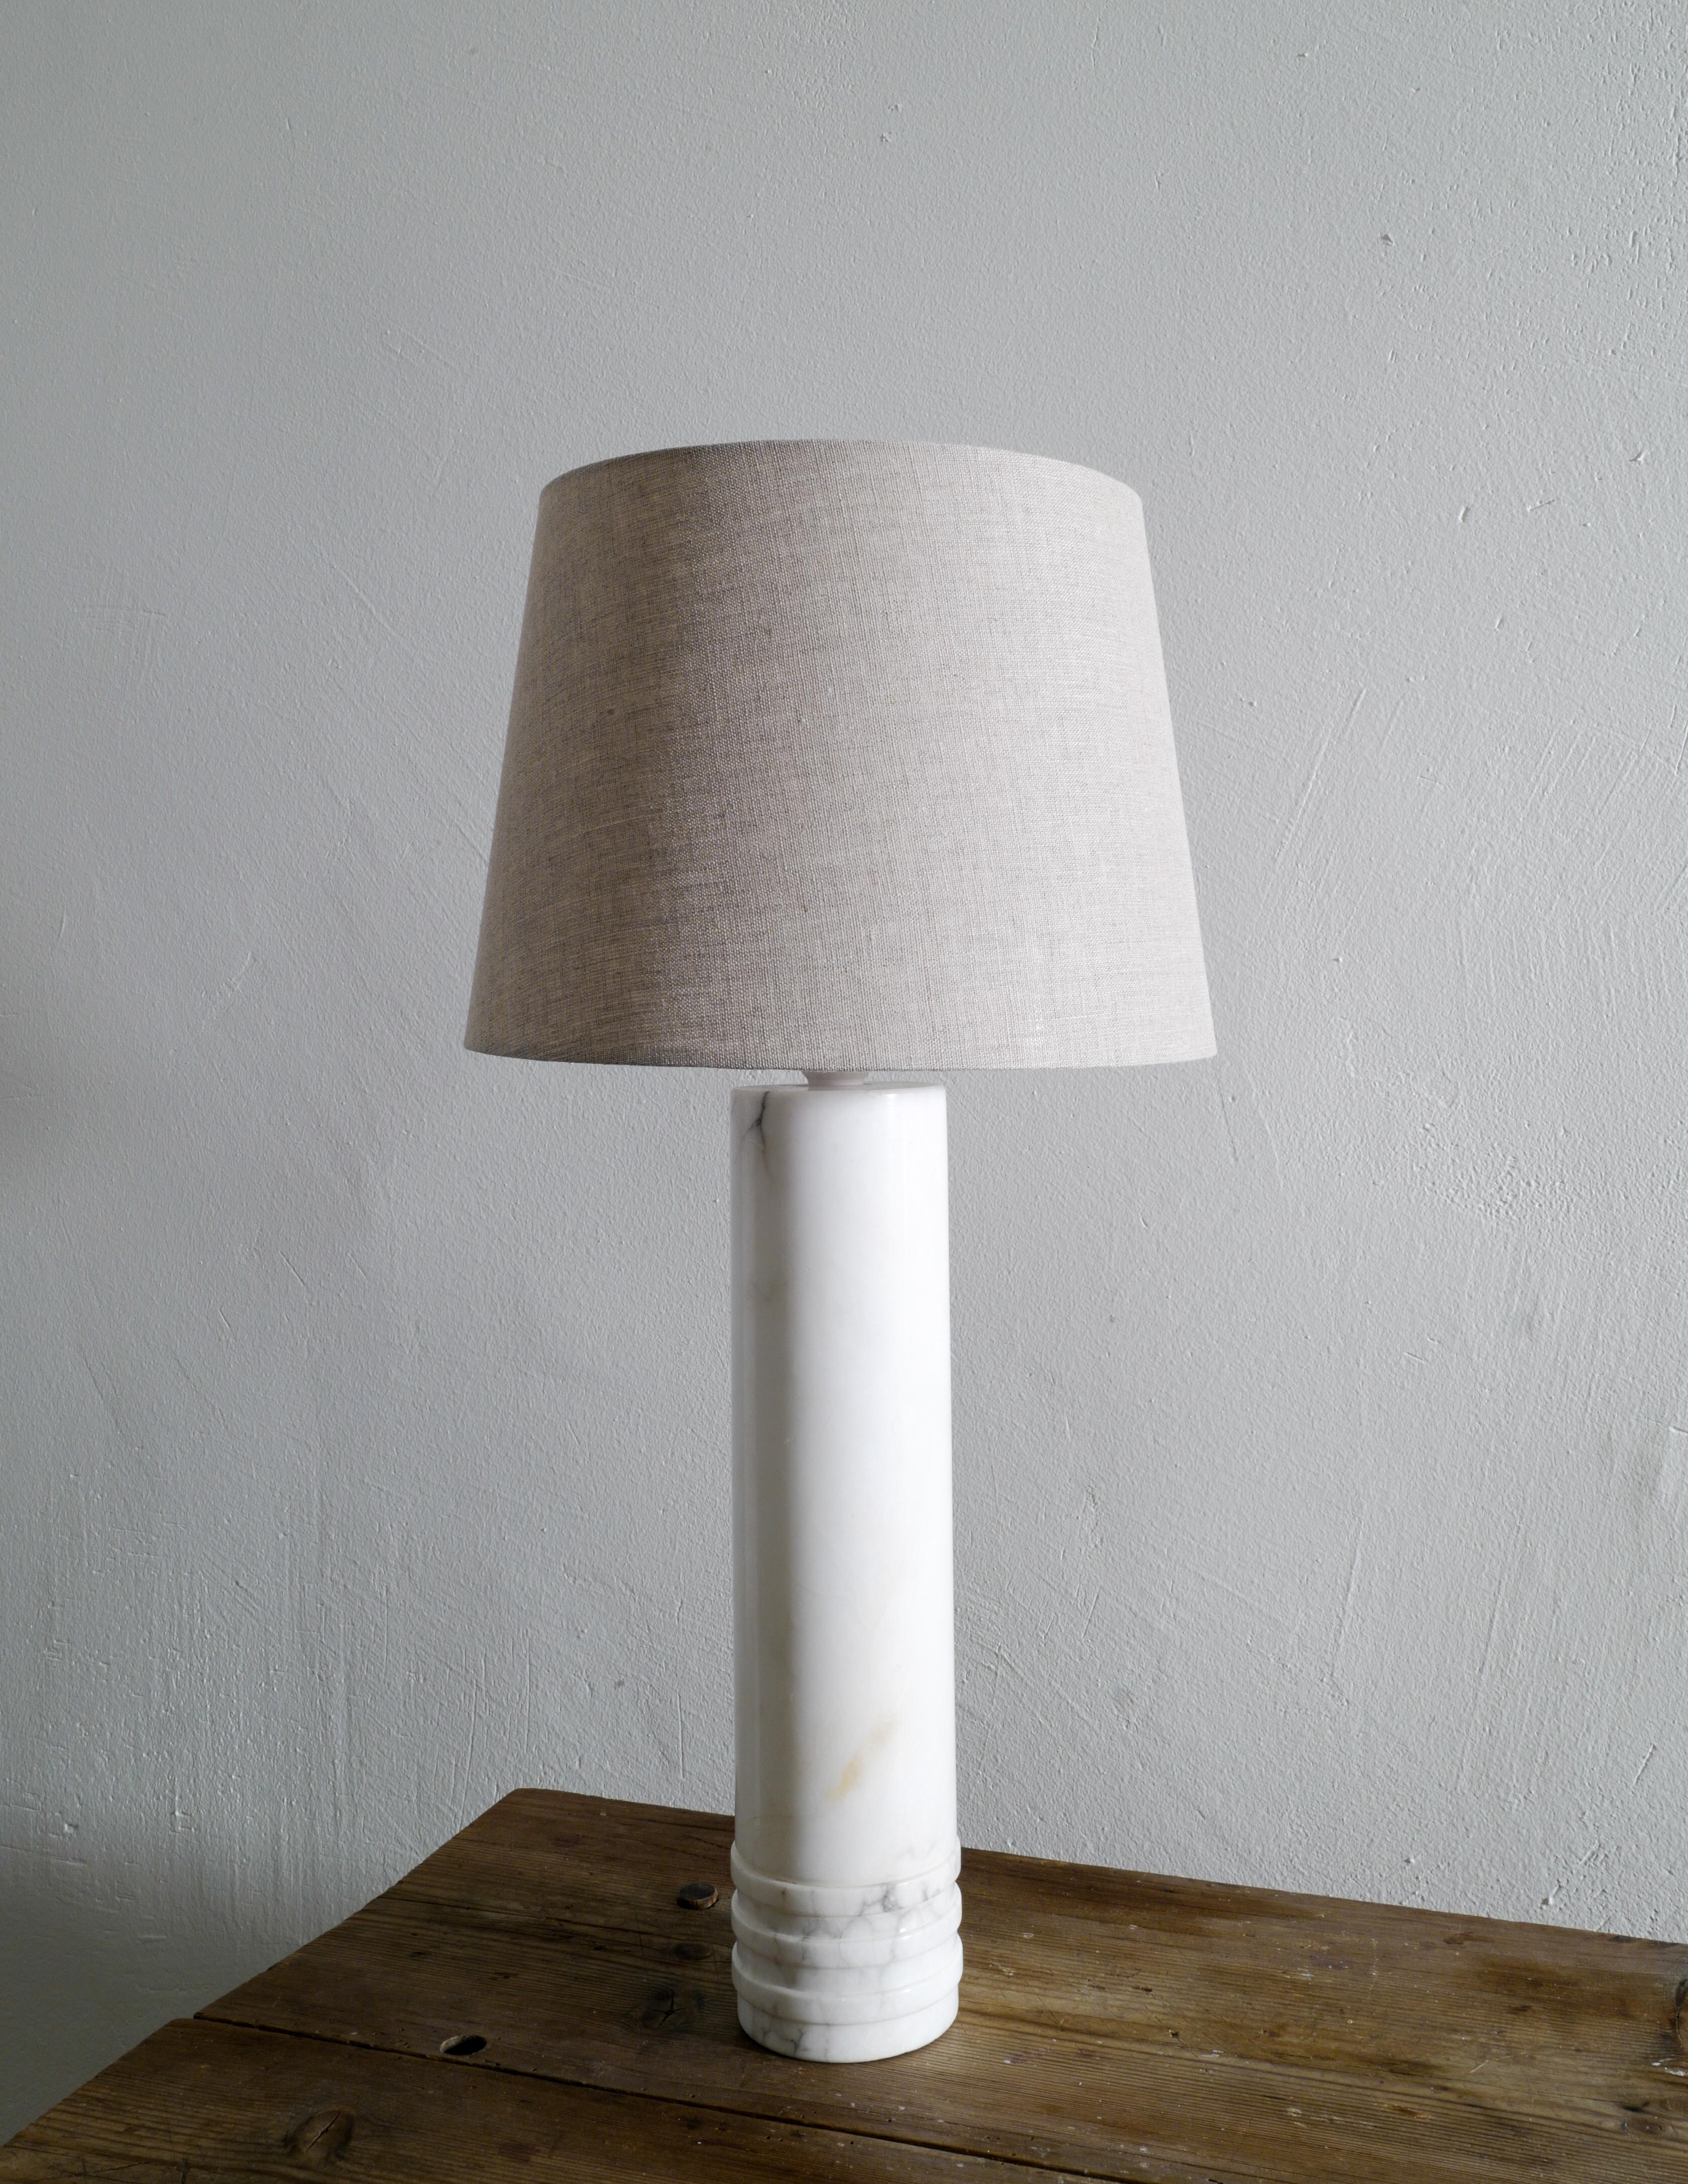 Rare table lamp produced by Bergboms in solid marble during the 1960s. In good original condition with the original sticker still on. Measurements without the shade. 

Shade is excluded from the purchase.